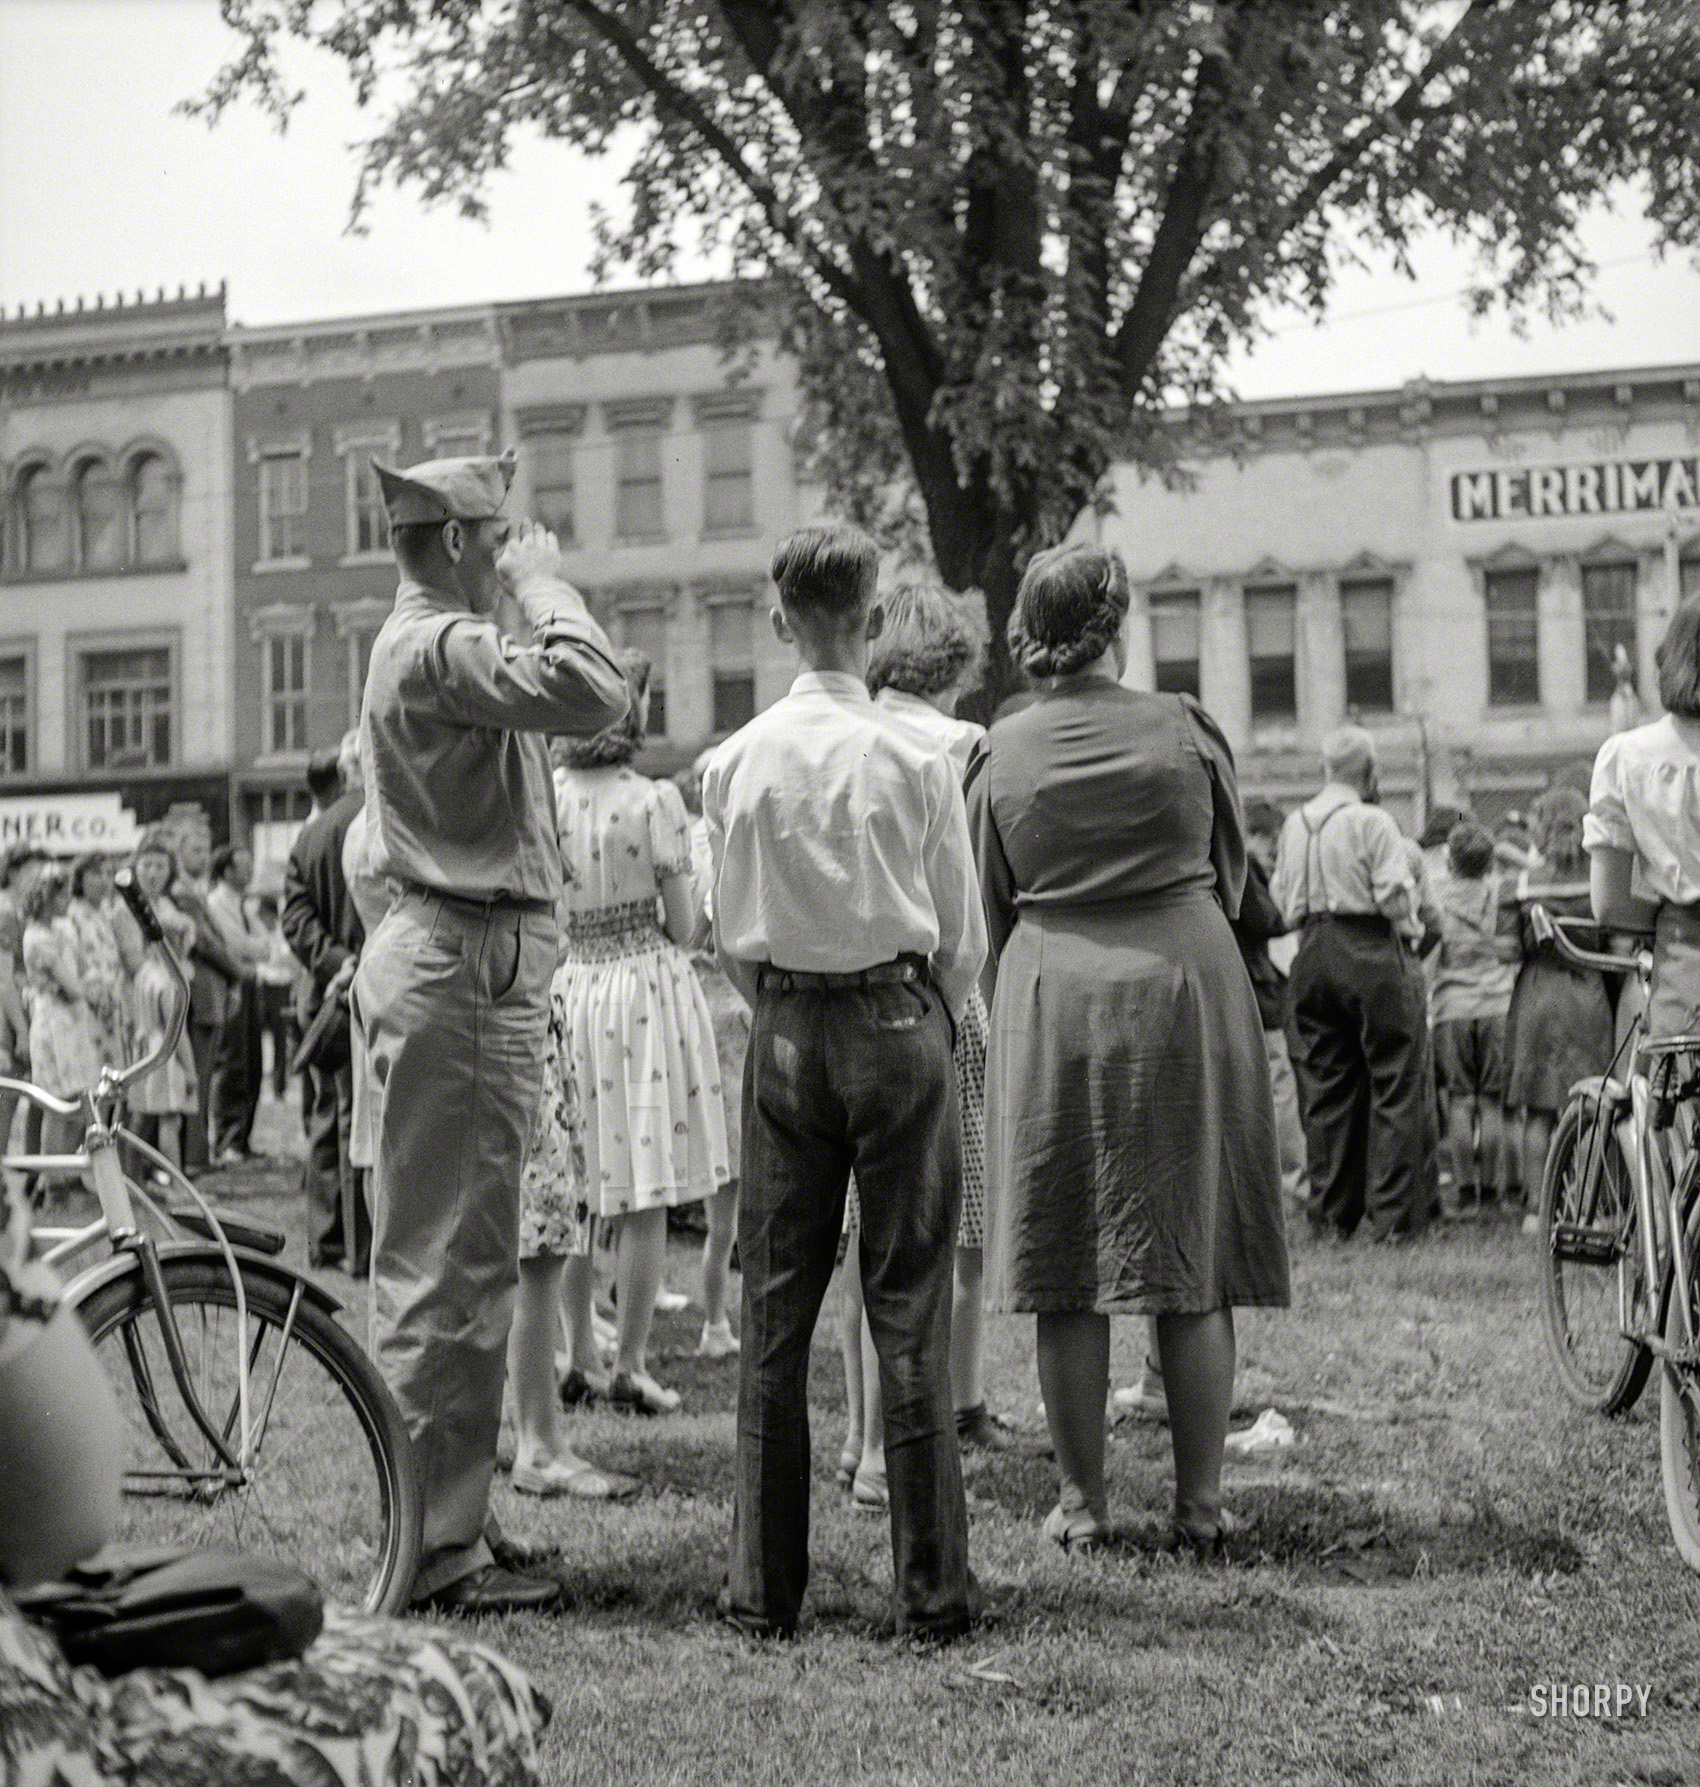 May 31, 1943. "Gallipolis, Ohio. Soldier at Decoration Day ceremonies." Photo by Arthur Siegel for the Office of War Information. View full size.